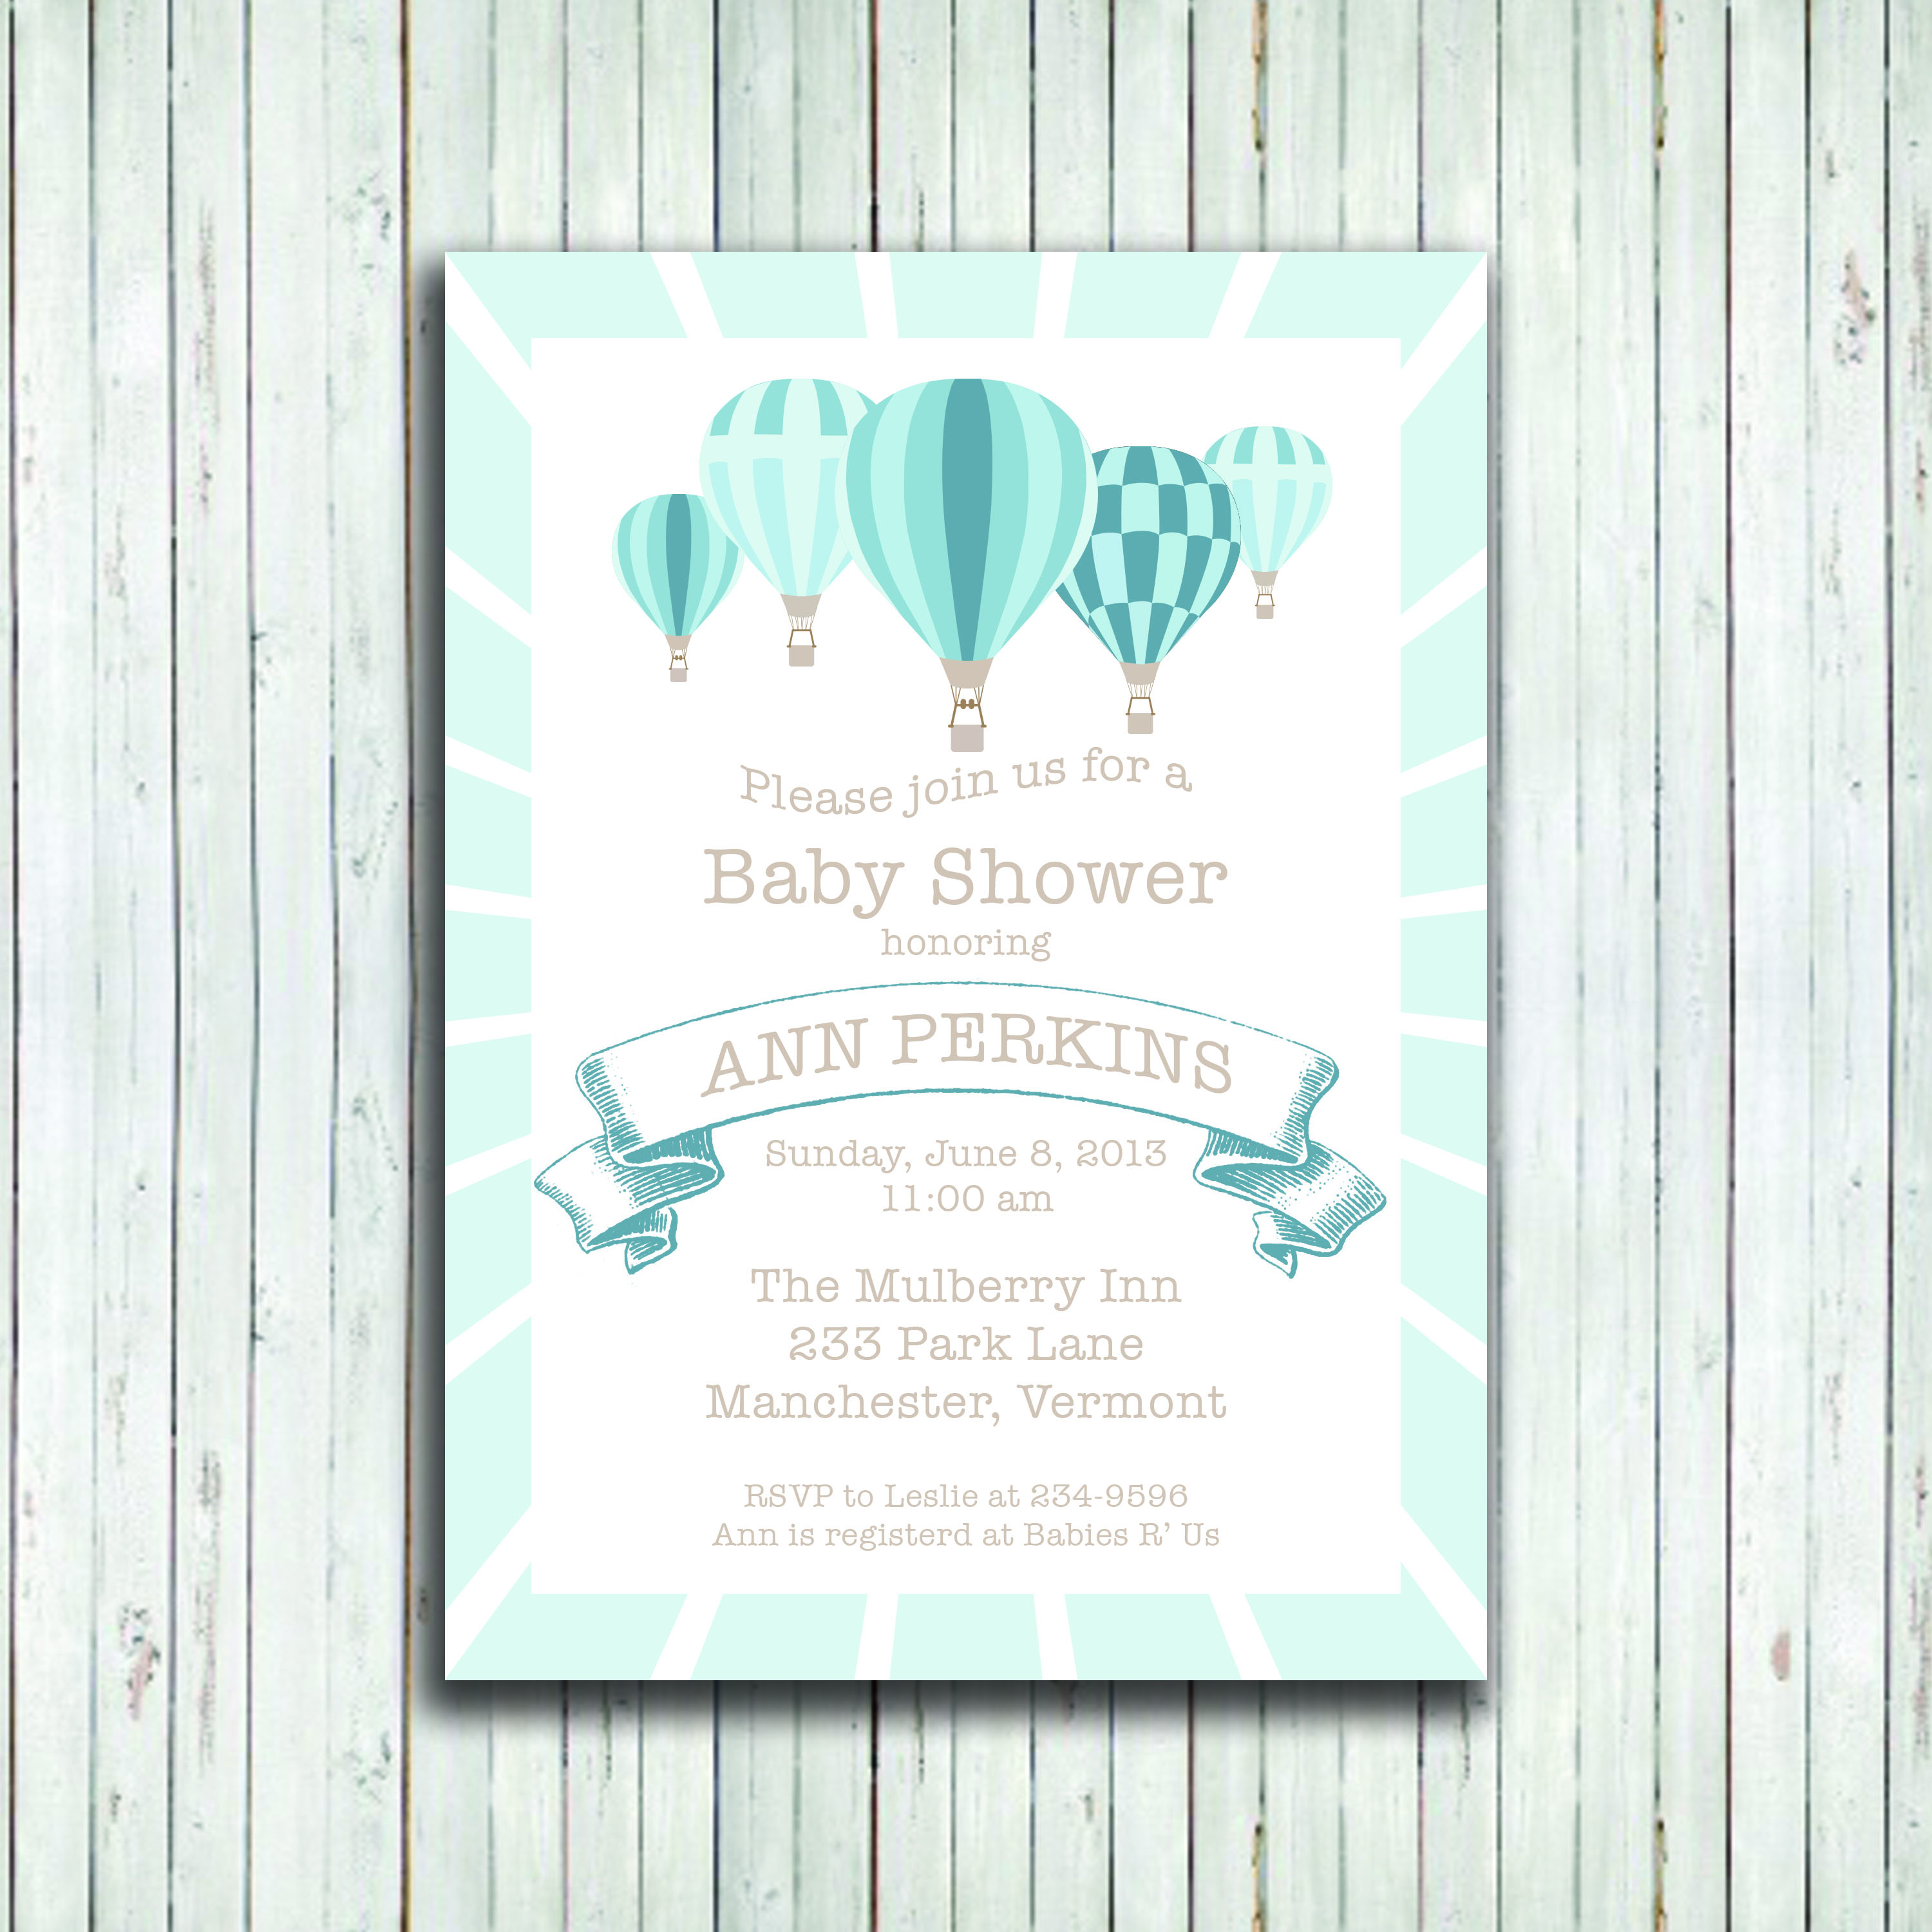 Are there baby shower invitations on Etsy?